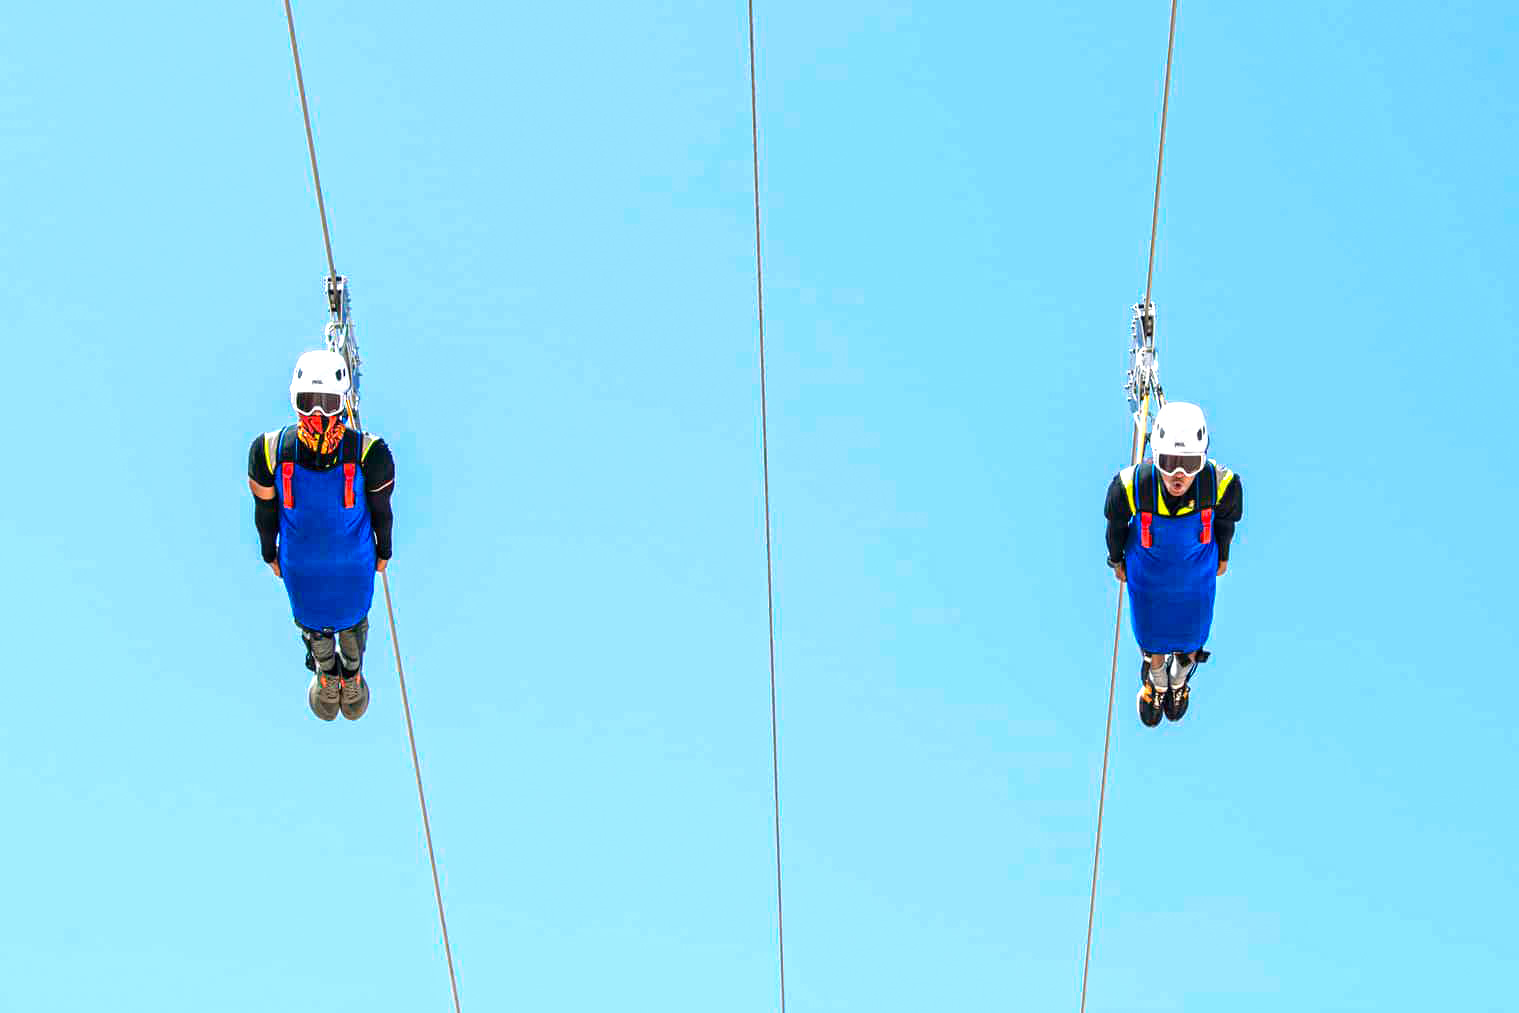 Special Group Discount on Double Round Zipline